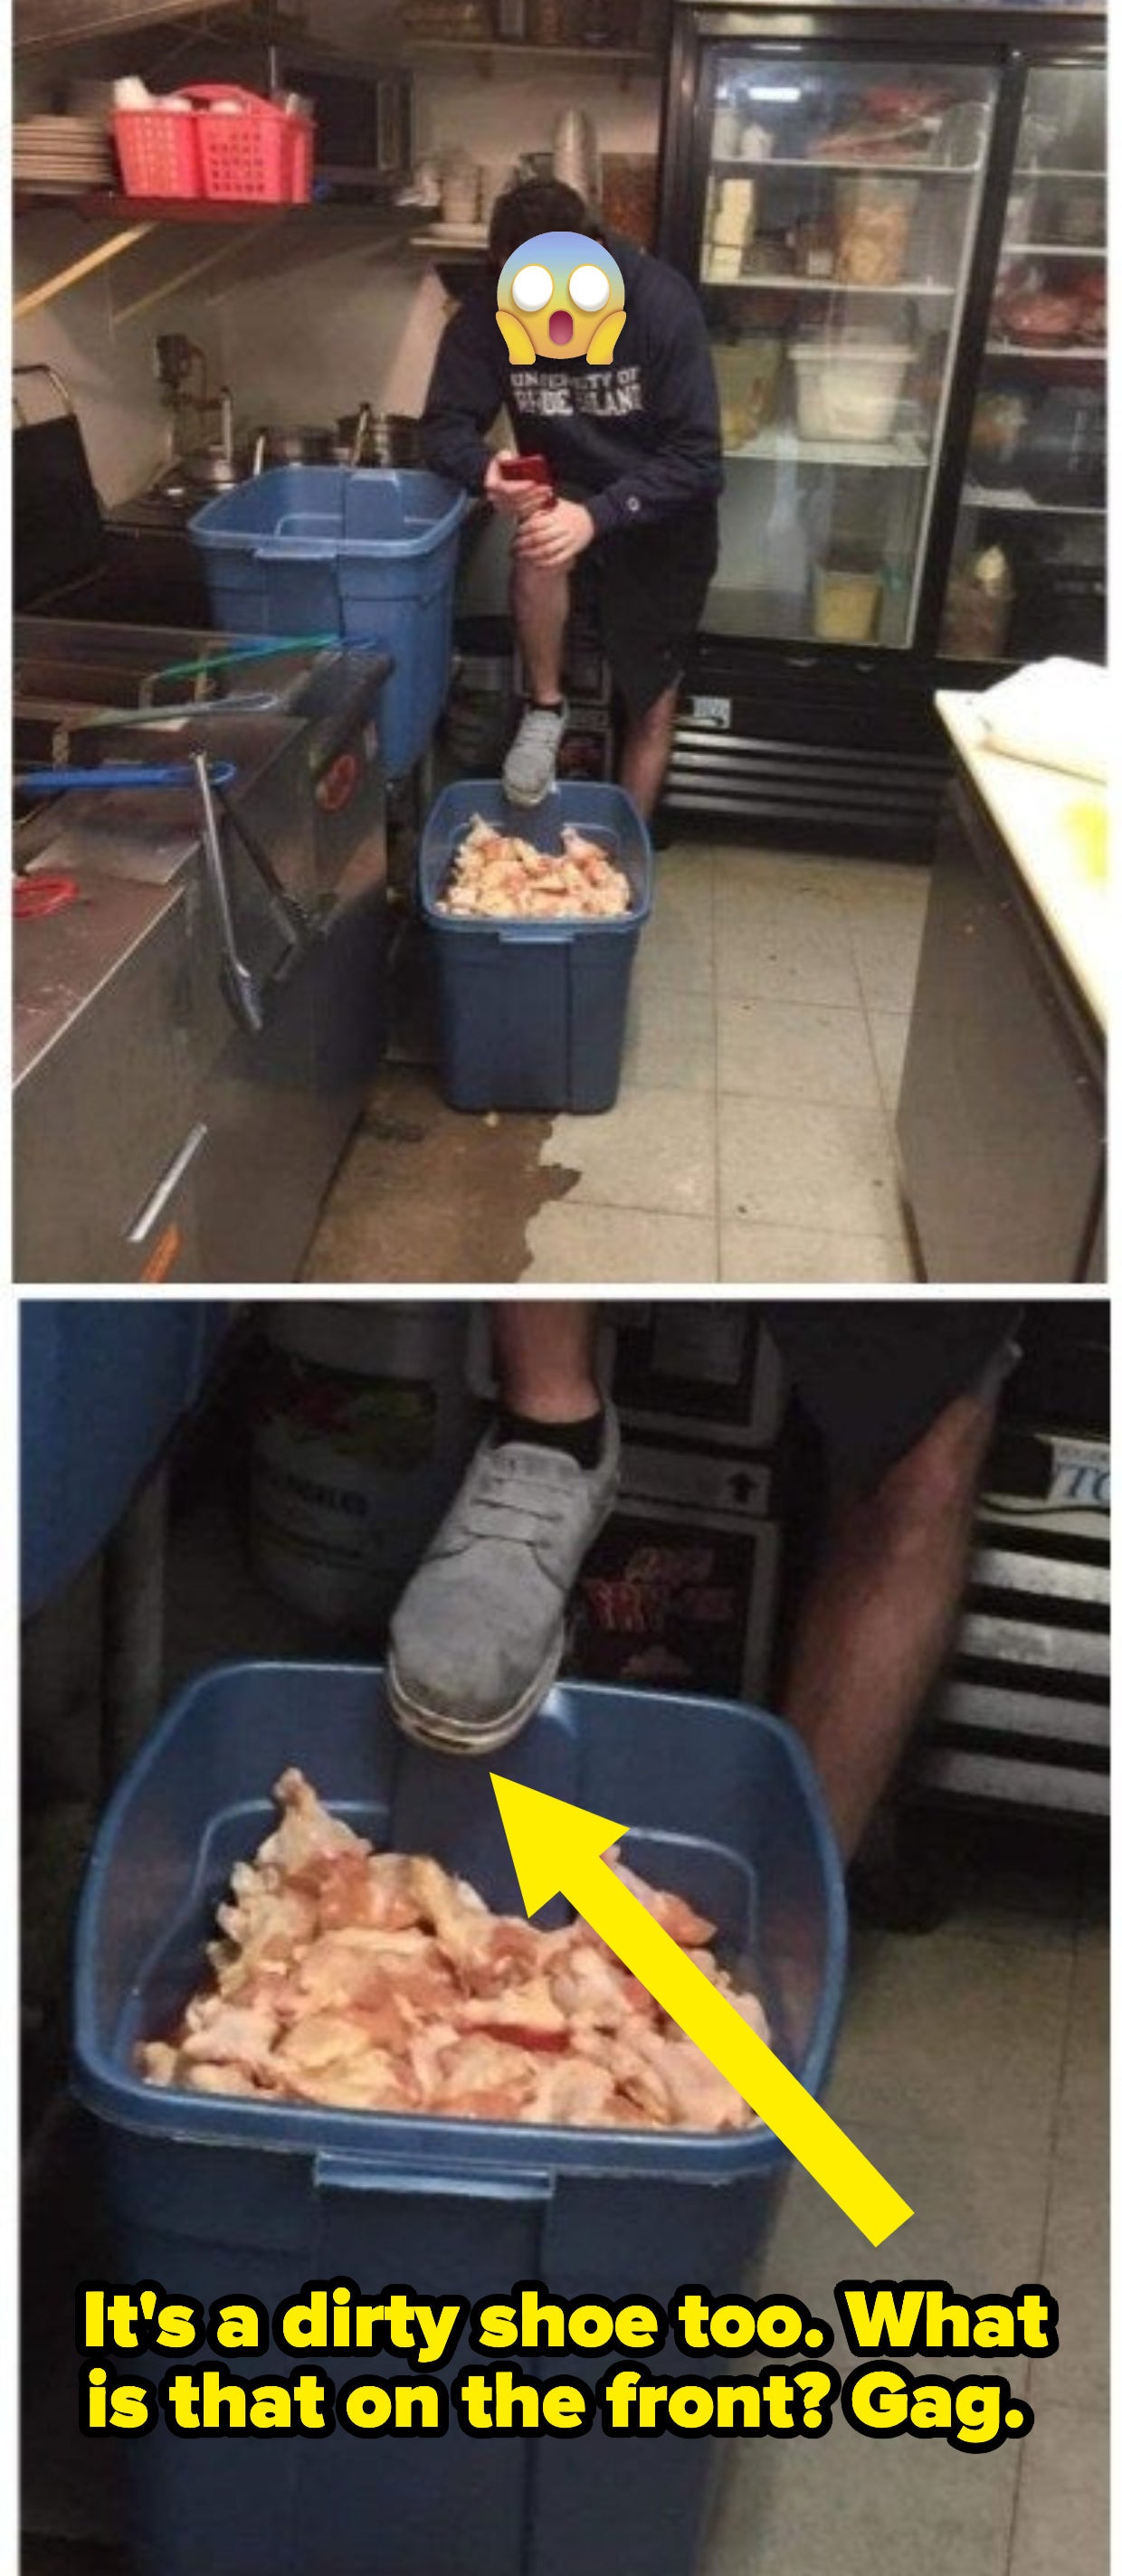 Someone putting their foot on a storage bin filled with chicken